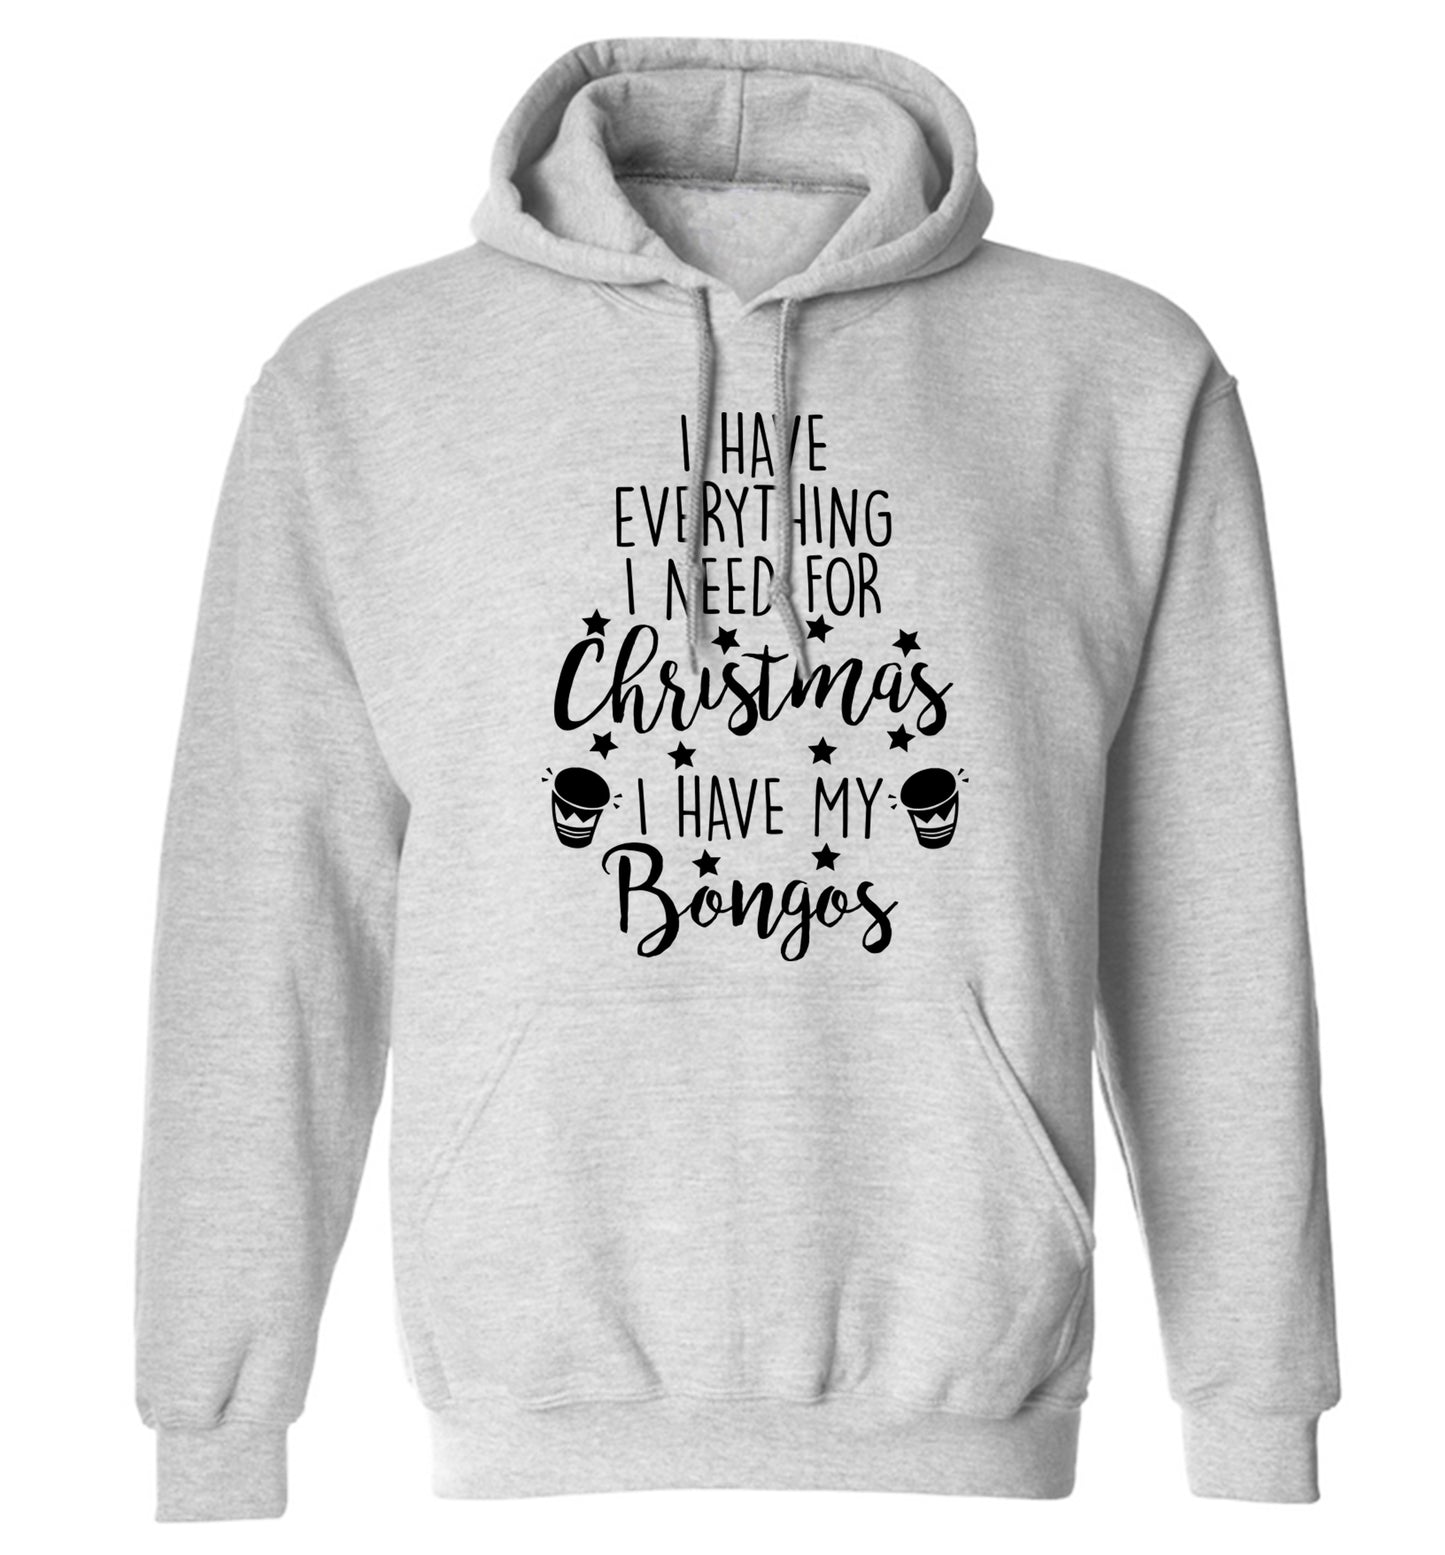 I have everything I need for Christmas I have my bongos! adults unisex grey hoodie 2XL